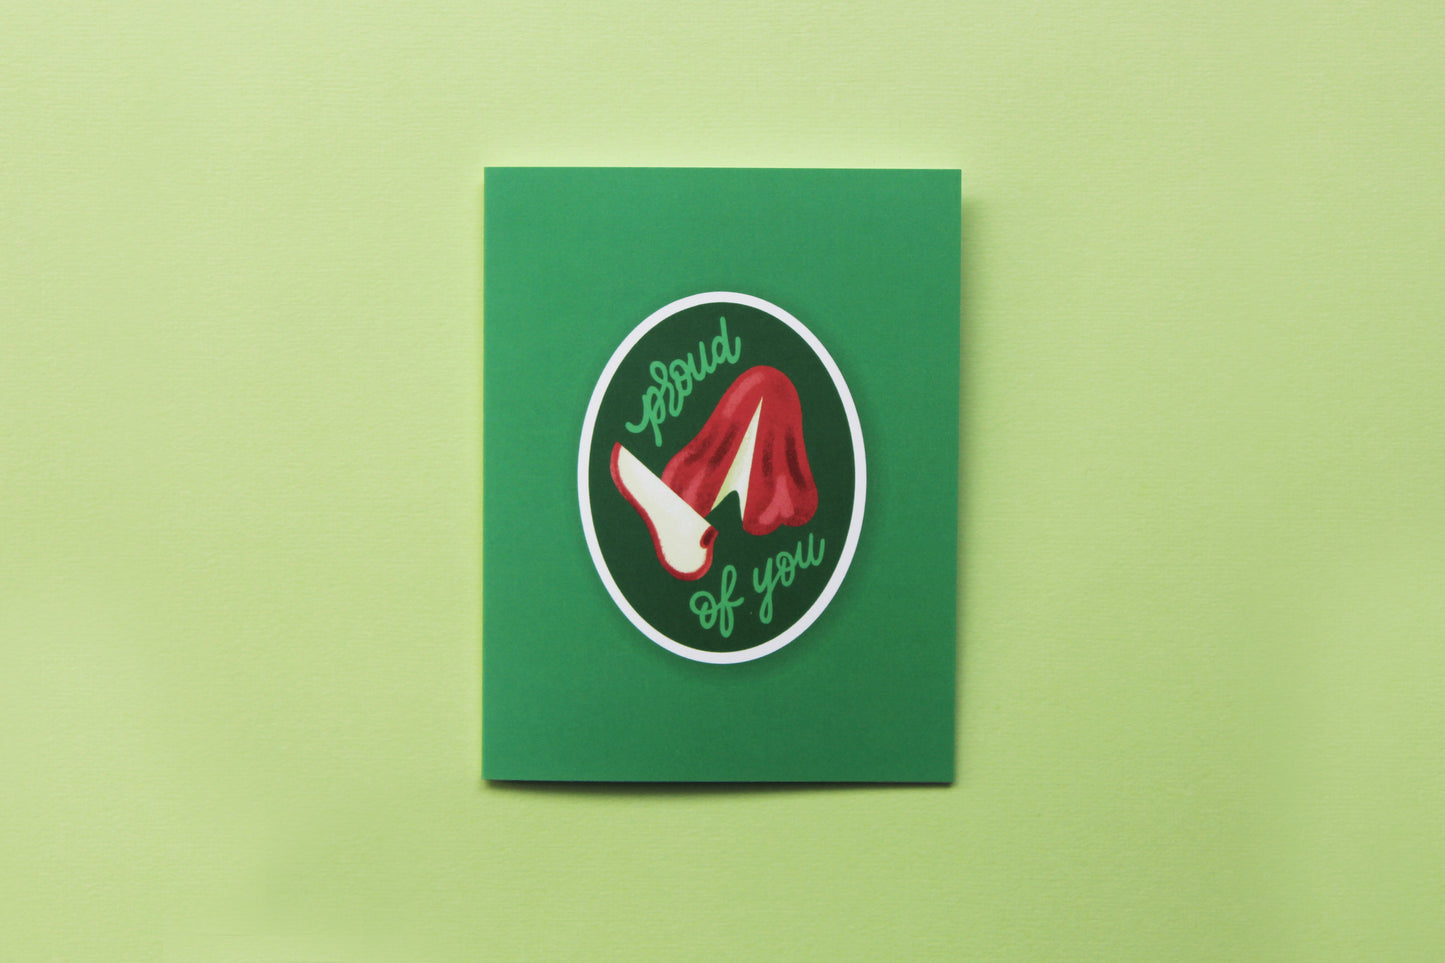 A photo of a green greeting card with a sliced wax apple that says "Proud of you"on a green background.